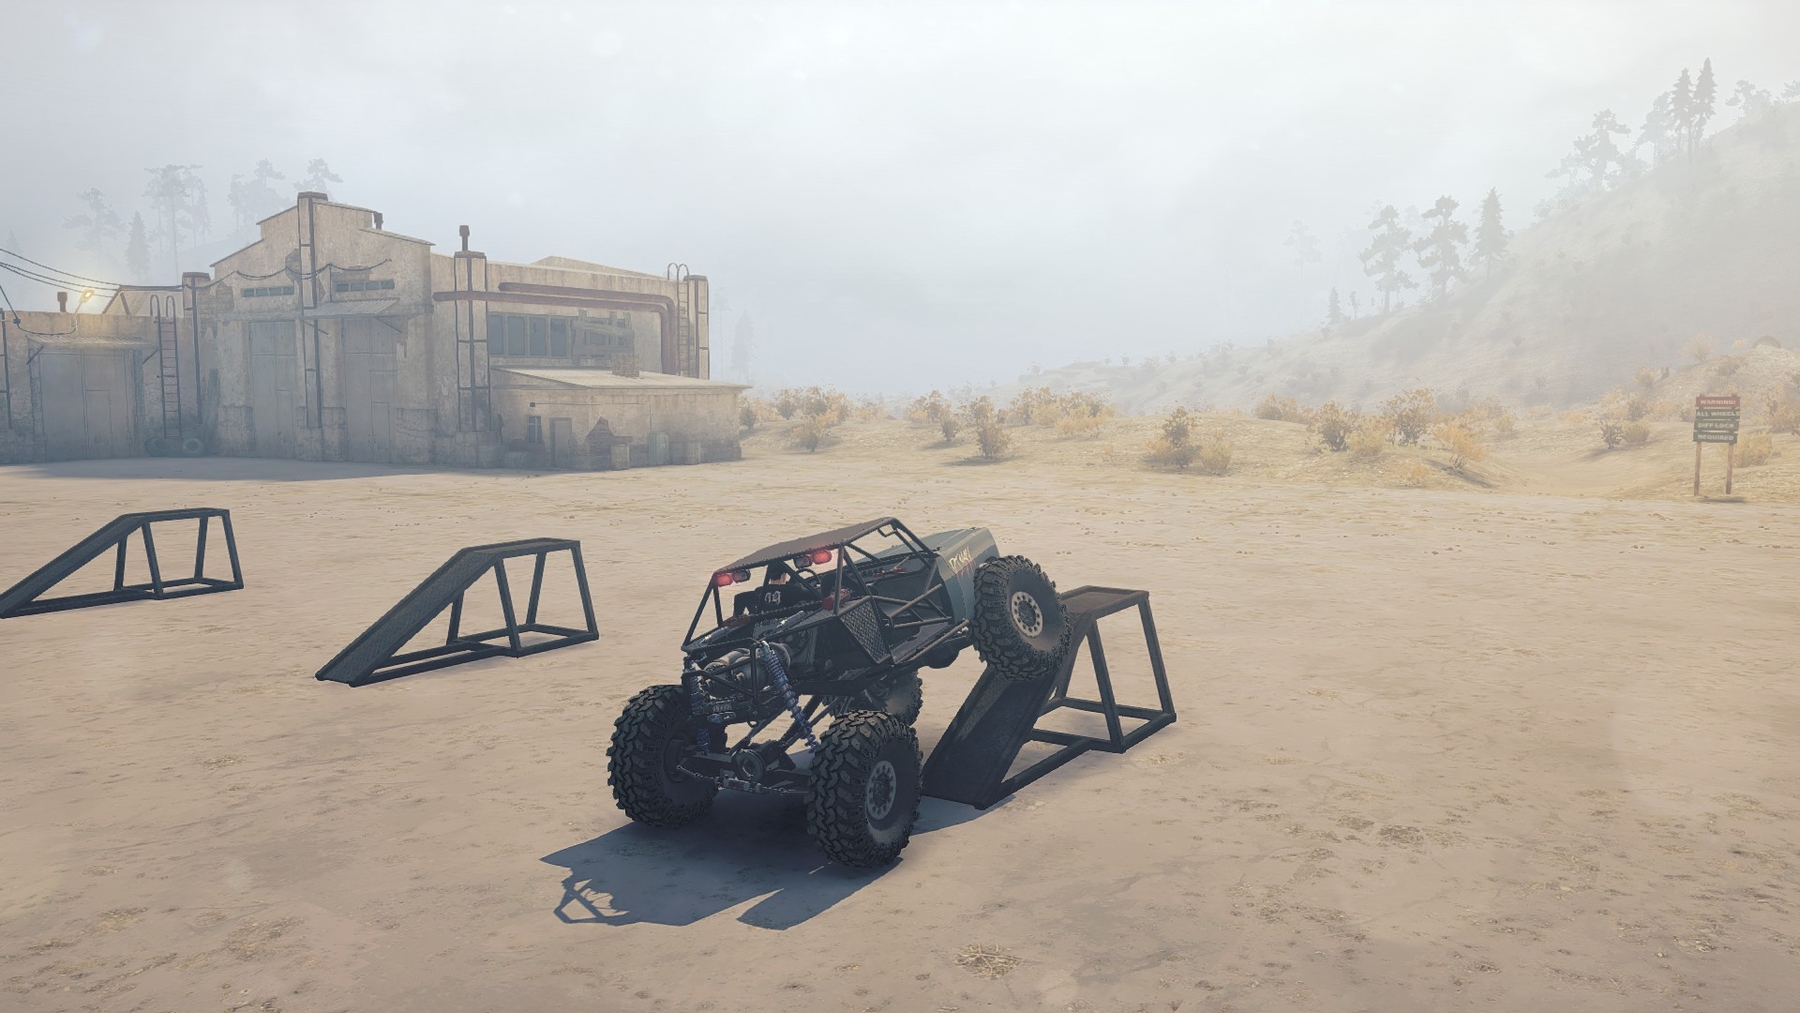 spintires mudrunner mod tracked vehicles